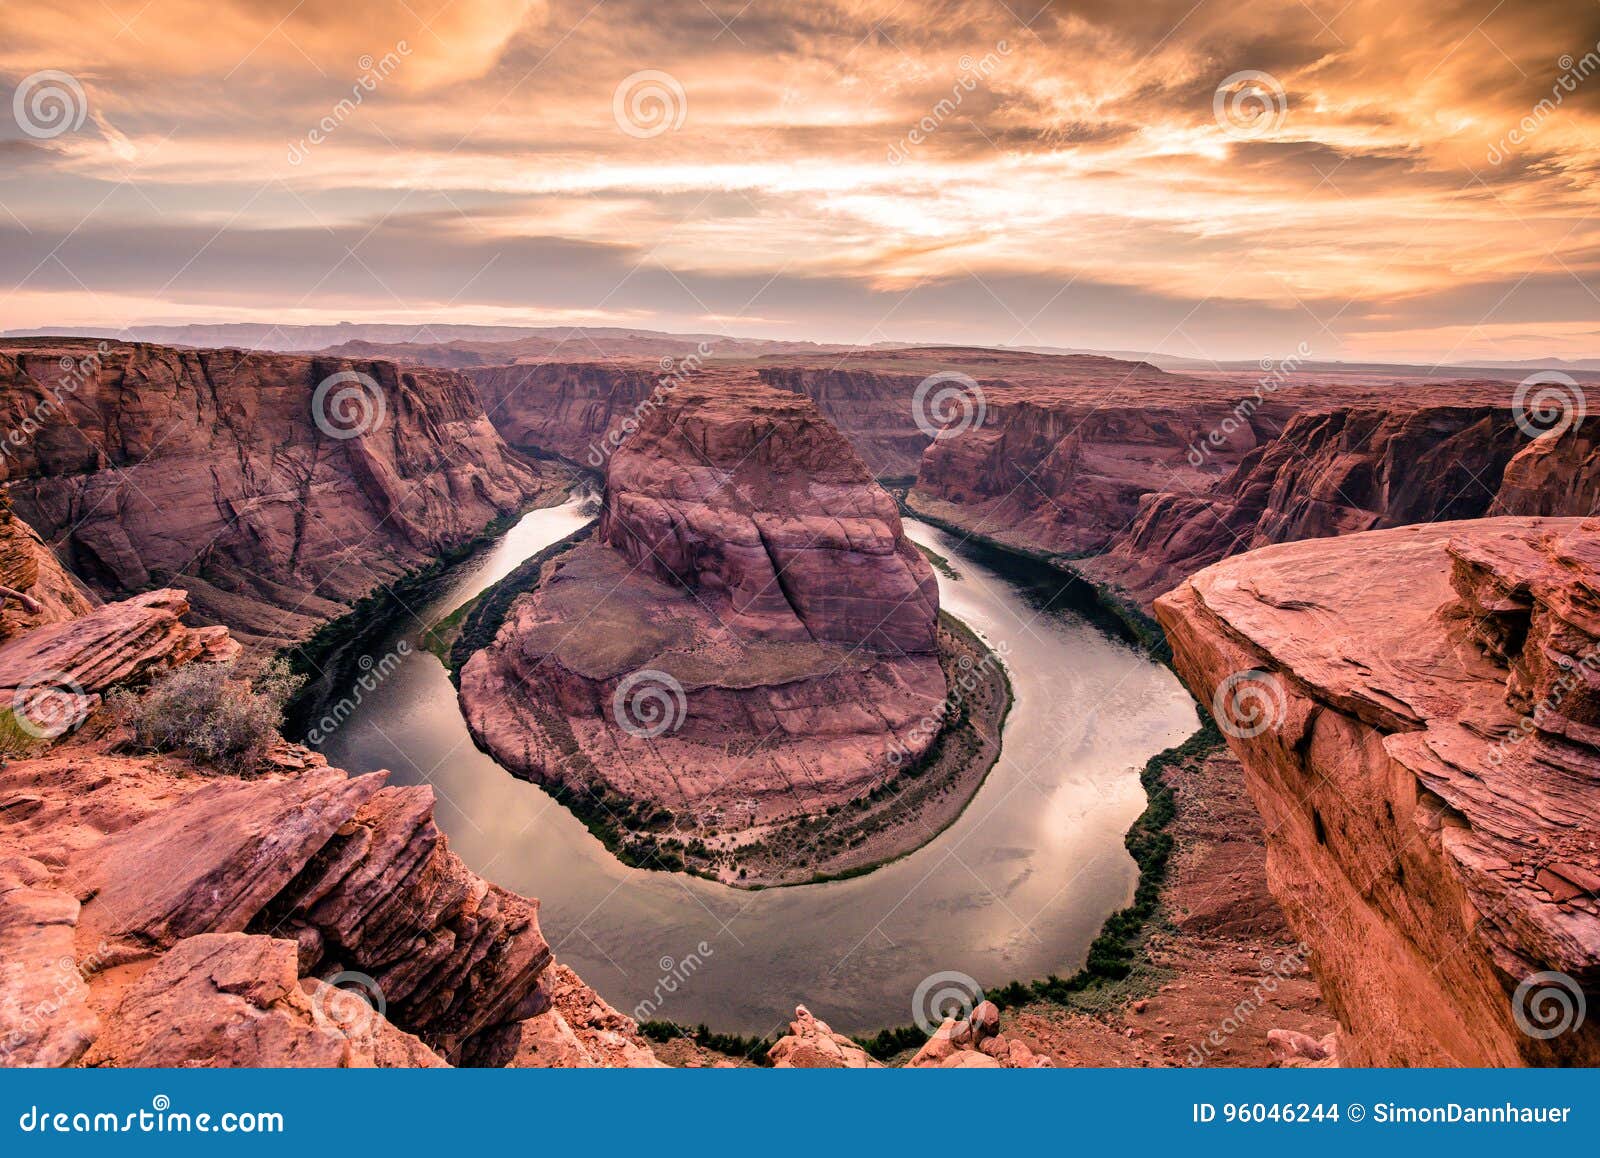 Sunset At Horseshoe Bend Grand Canyon With Colorado River